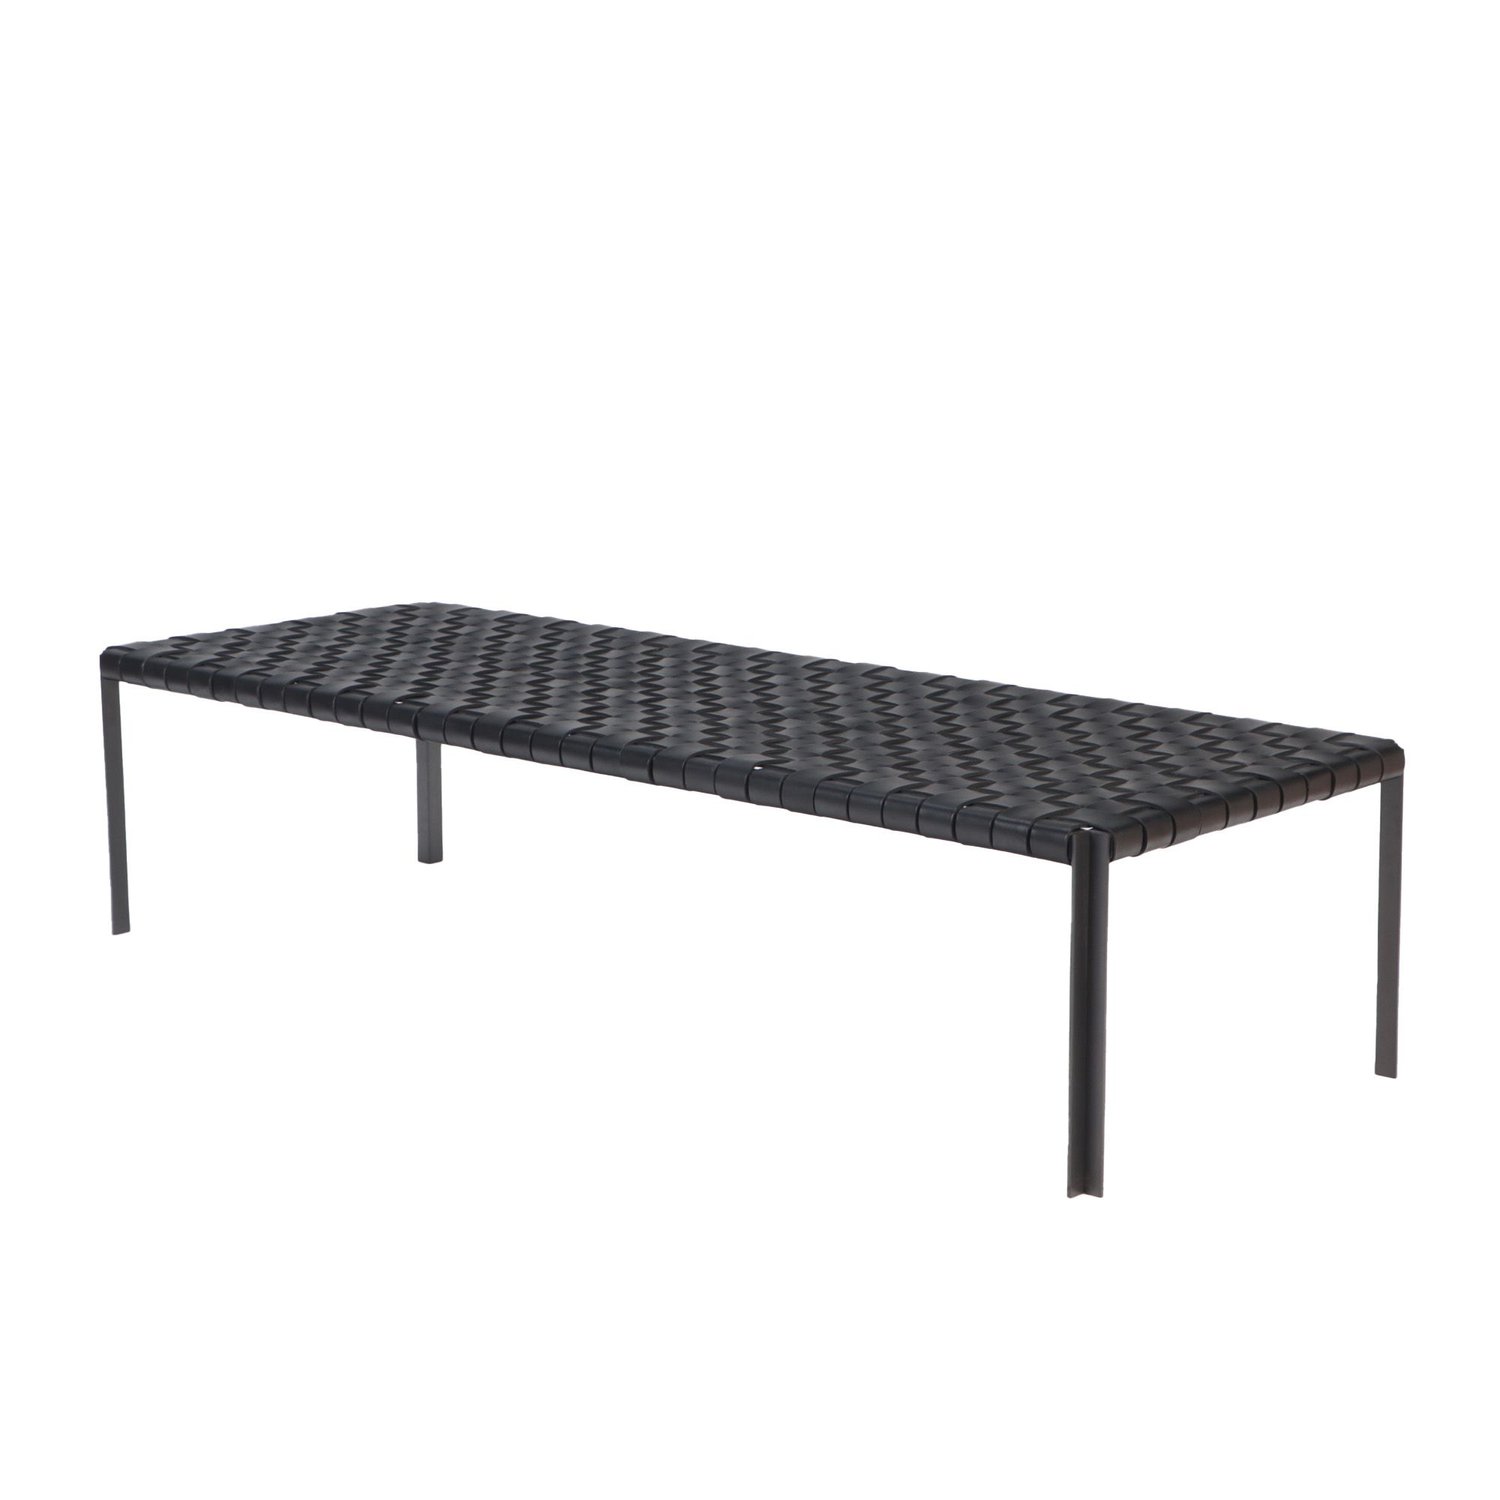 TG-18 Long Woven Leather Bench Industries in Frame Leather Blackened — Gratz on Black